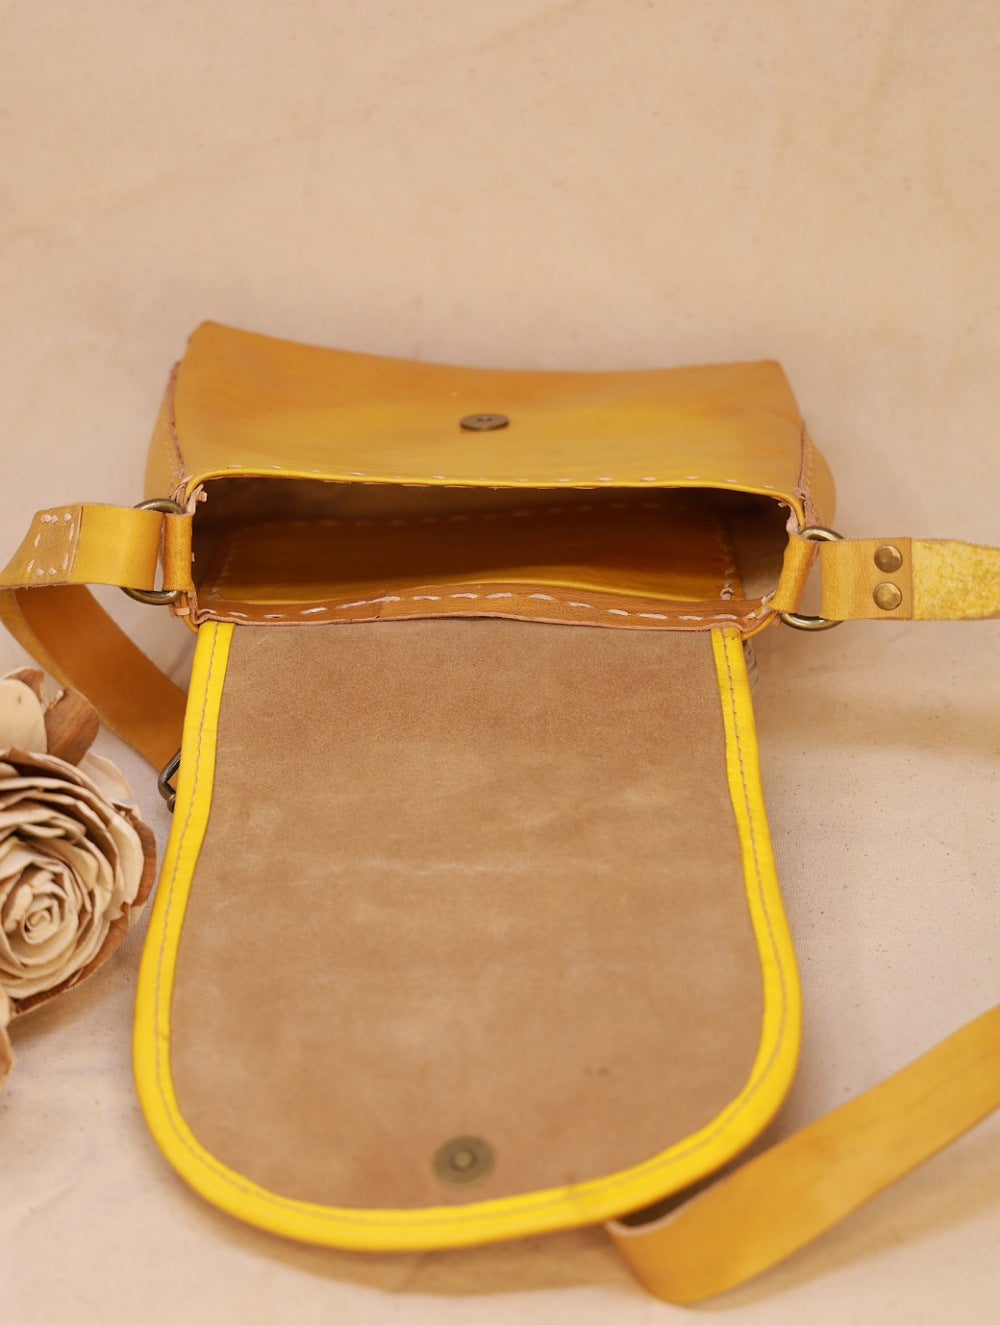 Load image into Gallery viewer, Handcrafted Jawaja Leather Sling Bag with Rug Patch - Grey &amp; Yellow